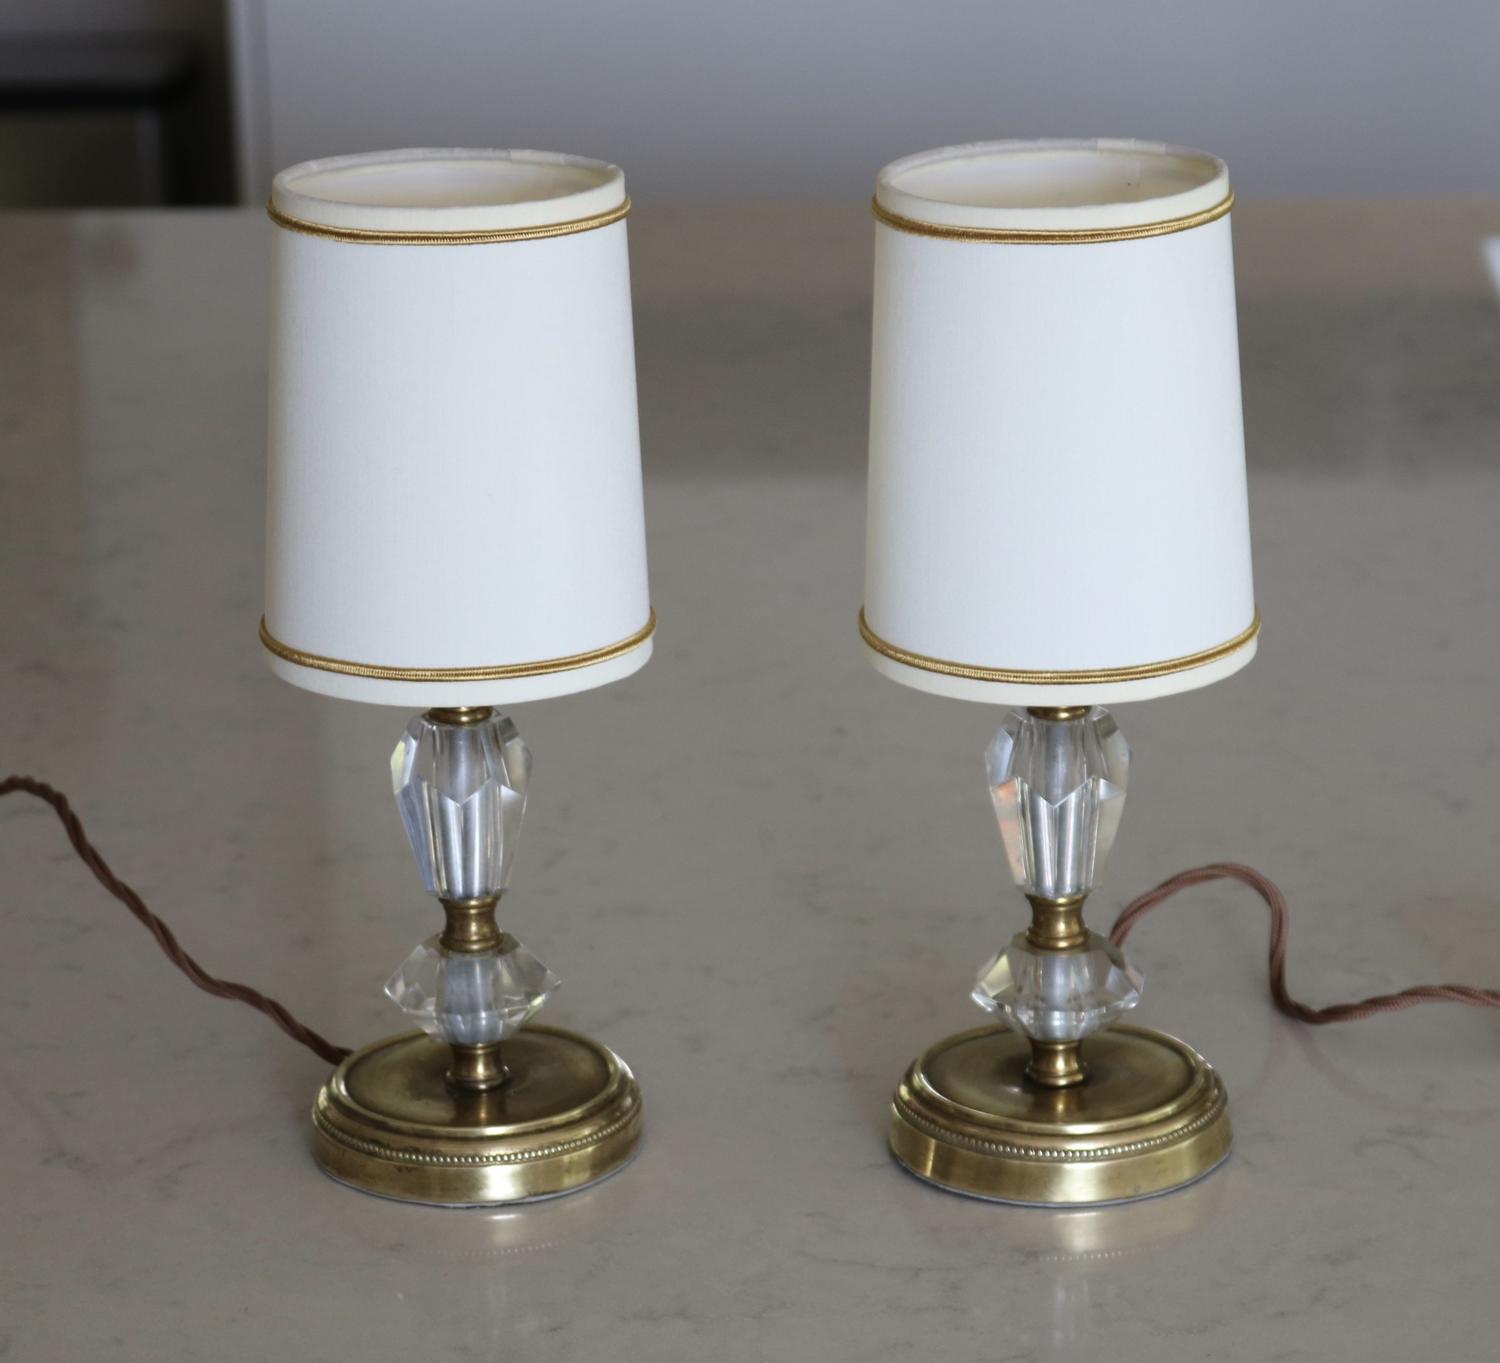 Pair of brass and glass bedside lamps